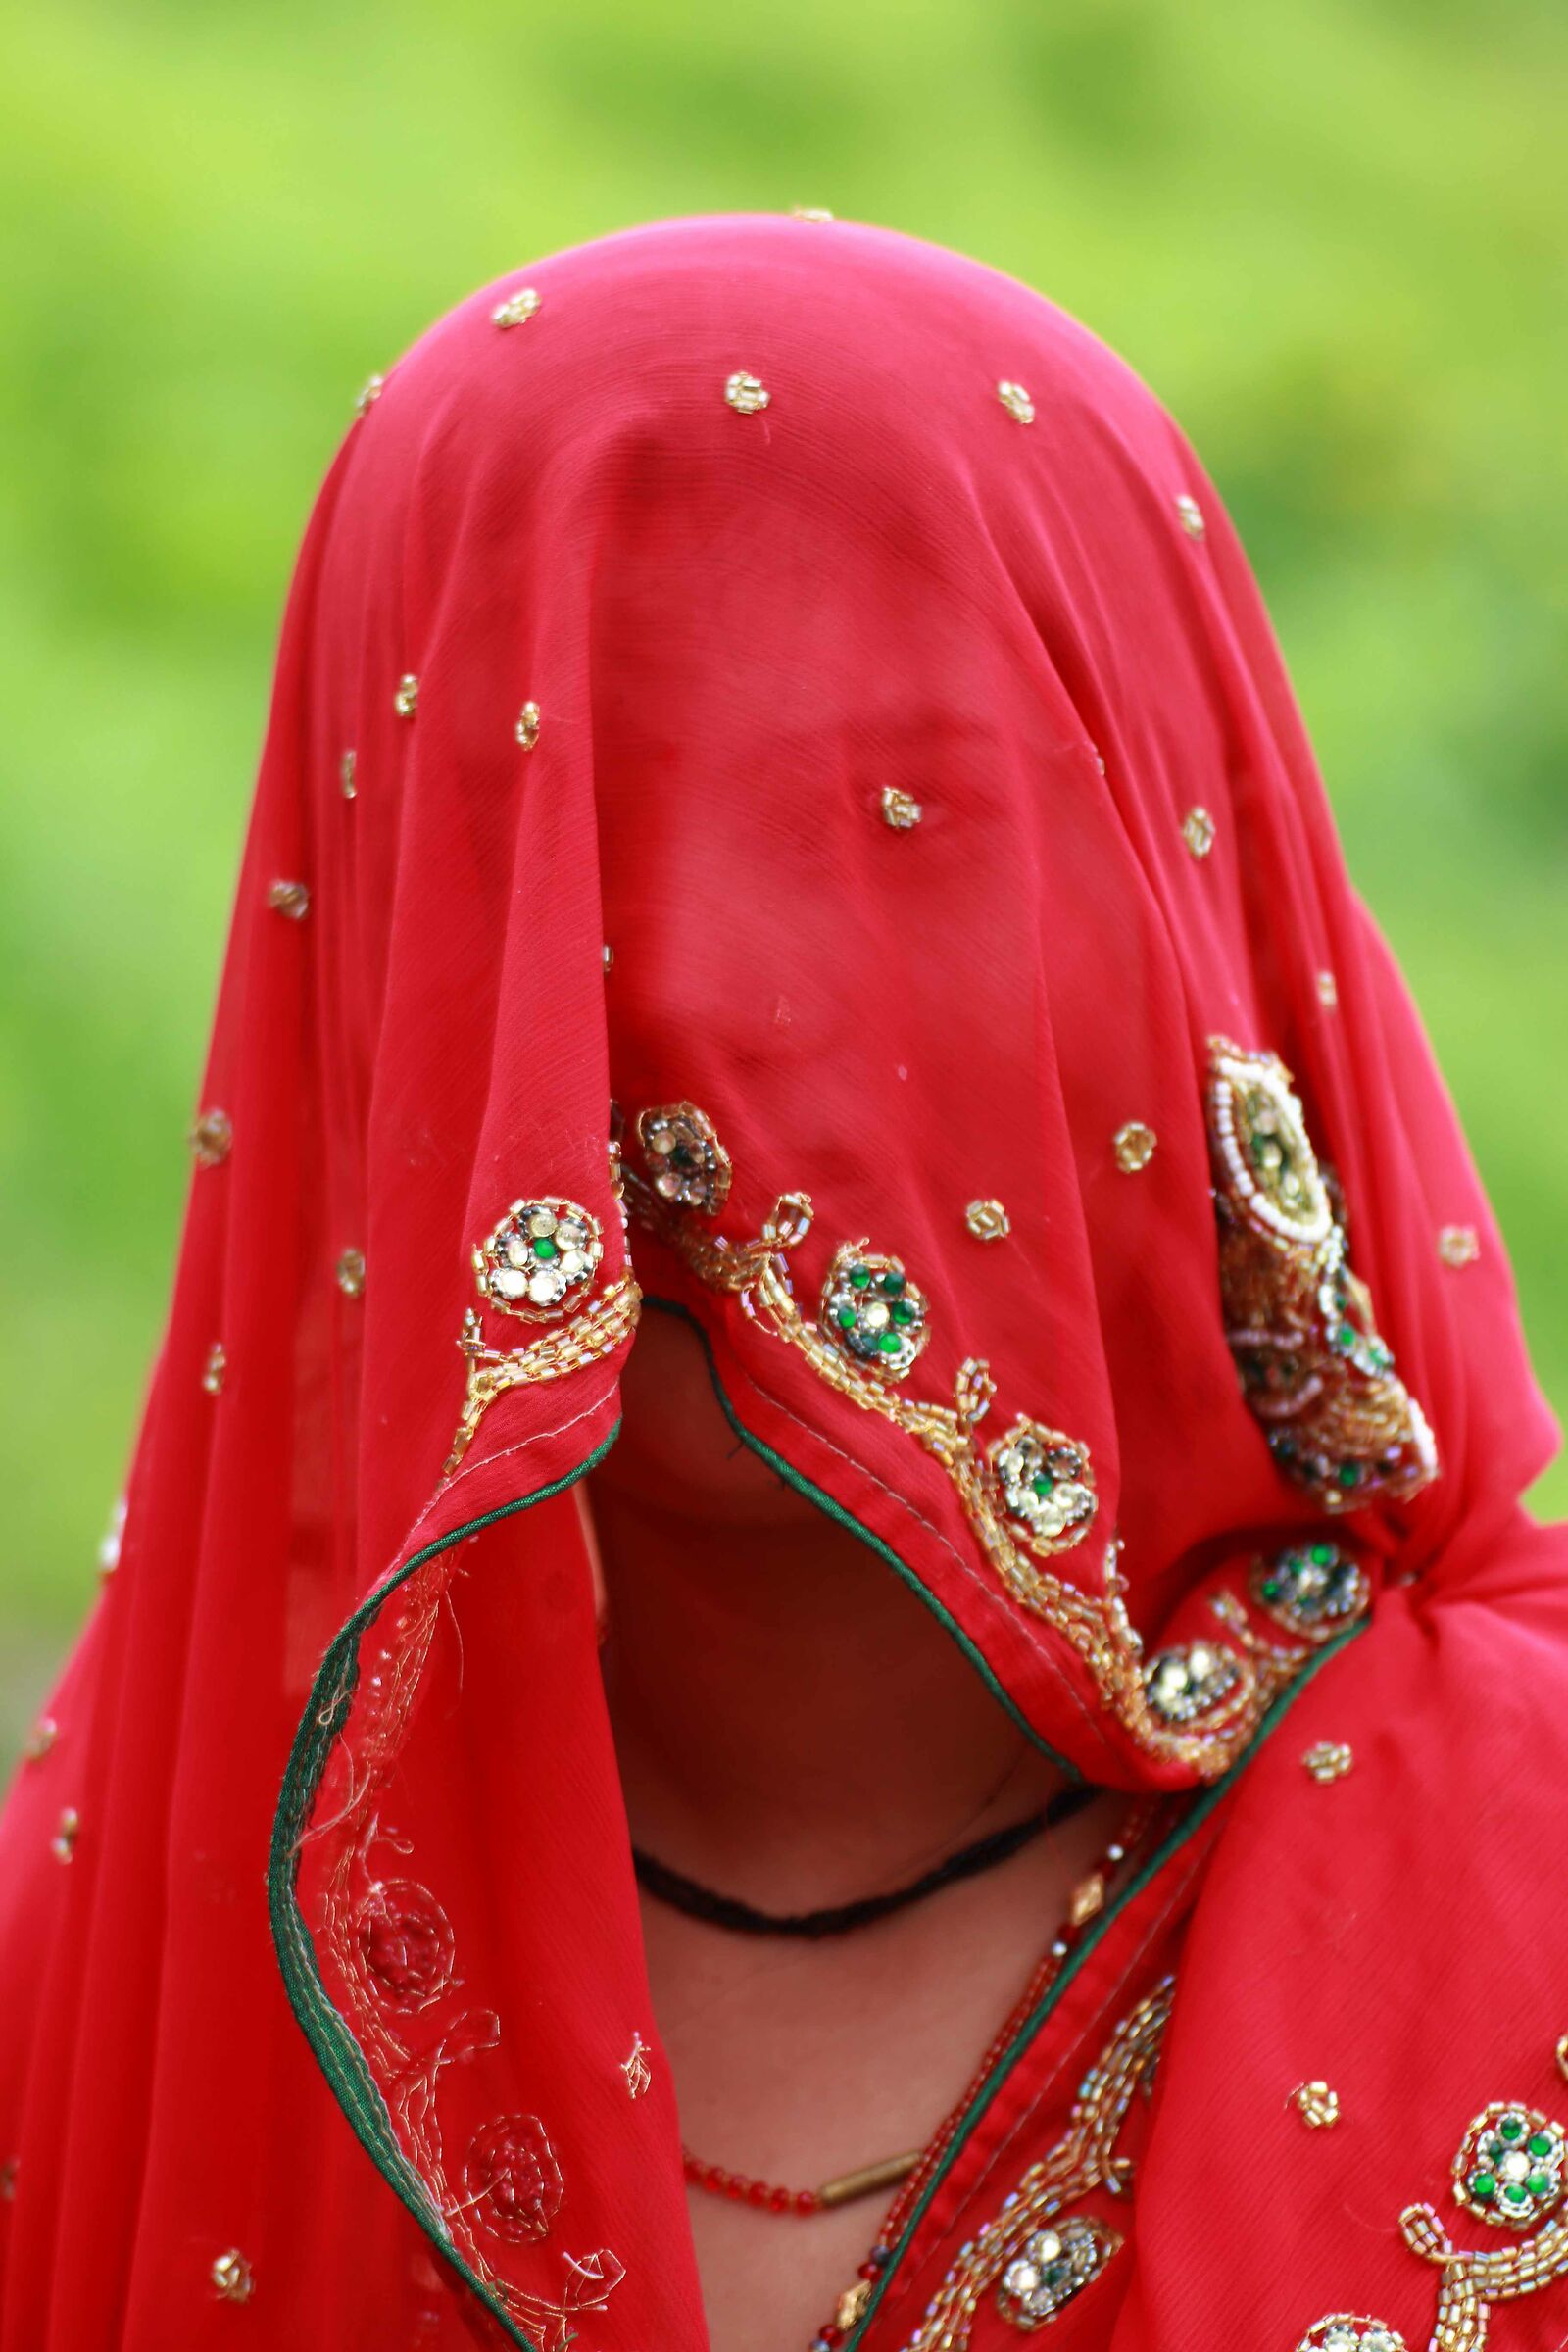 WOMAN IN RED - INDIA ...